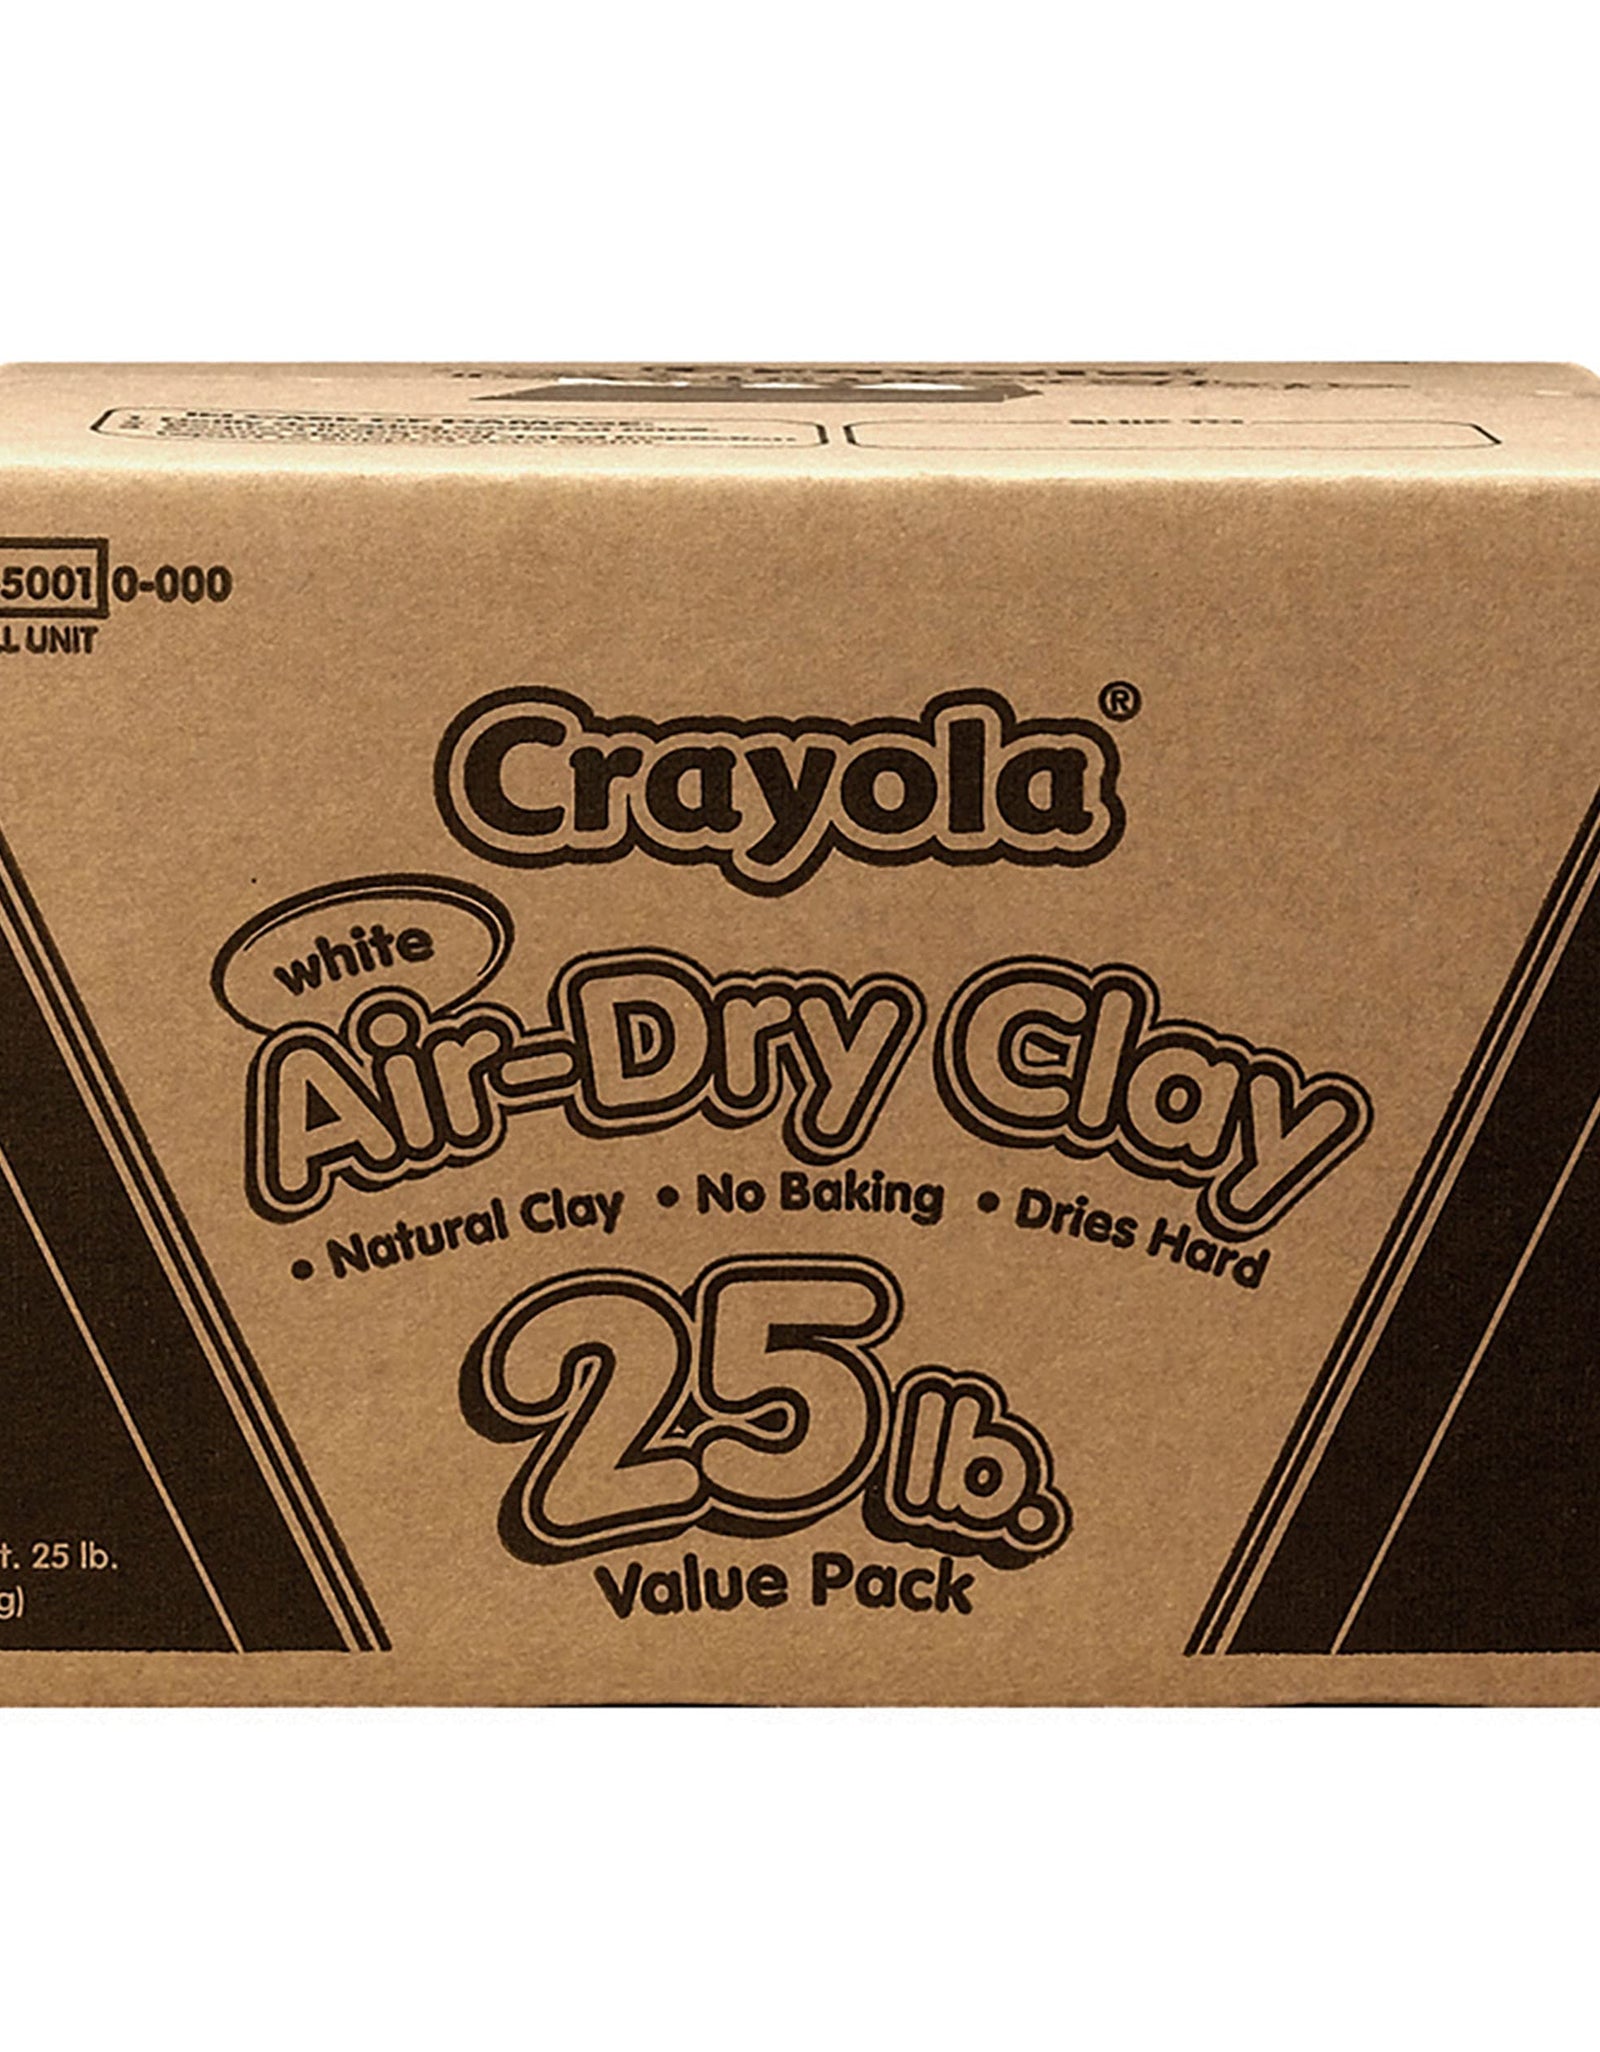 Crayola Air Dry Clay, White, No Bake Modeling Clay for Kids, 25lb